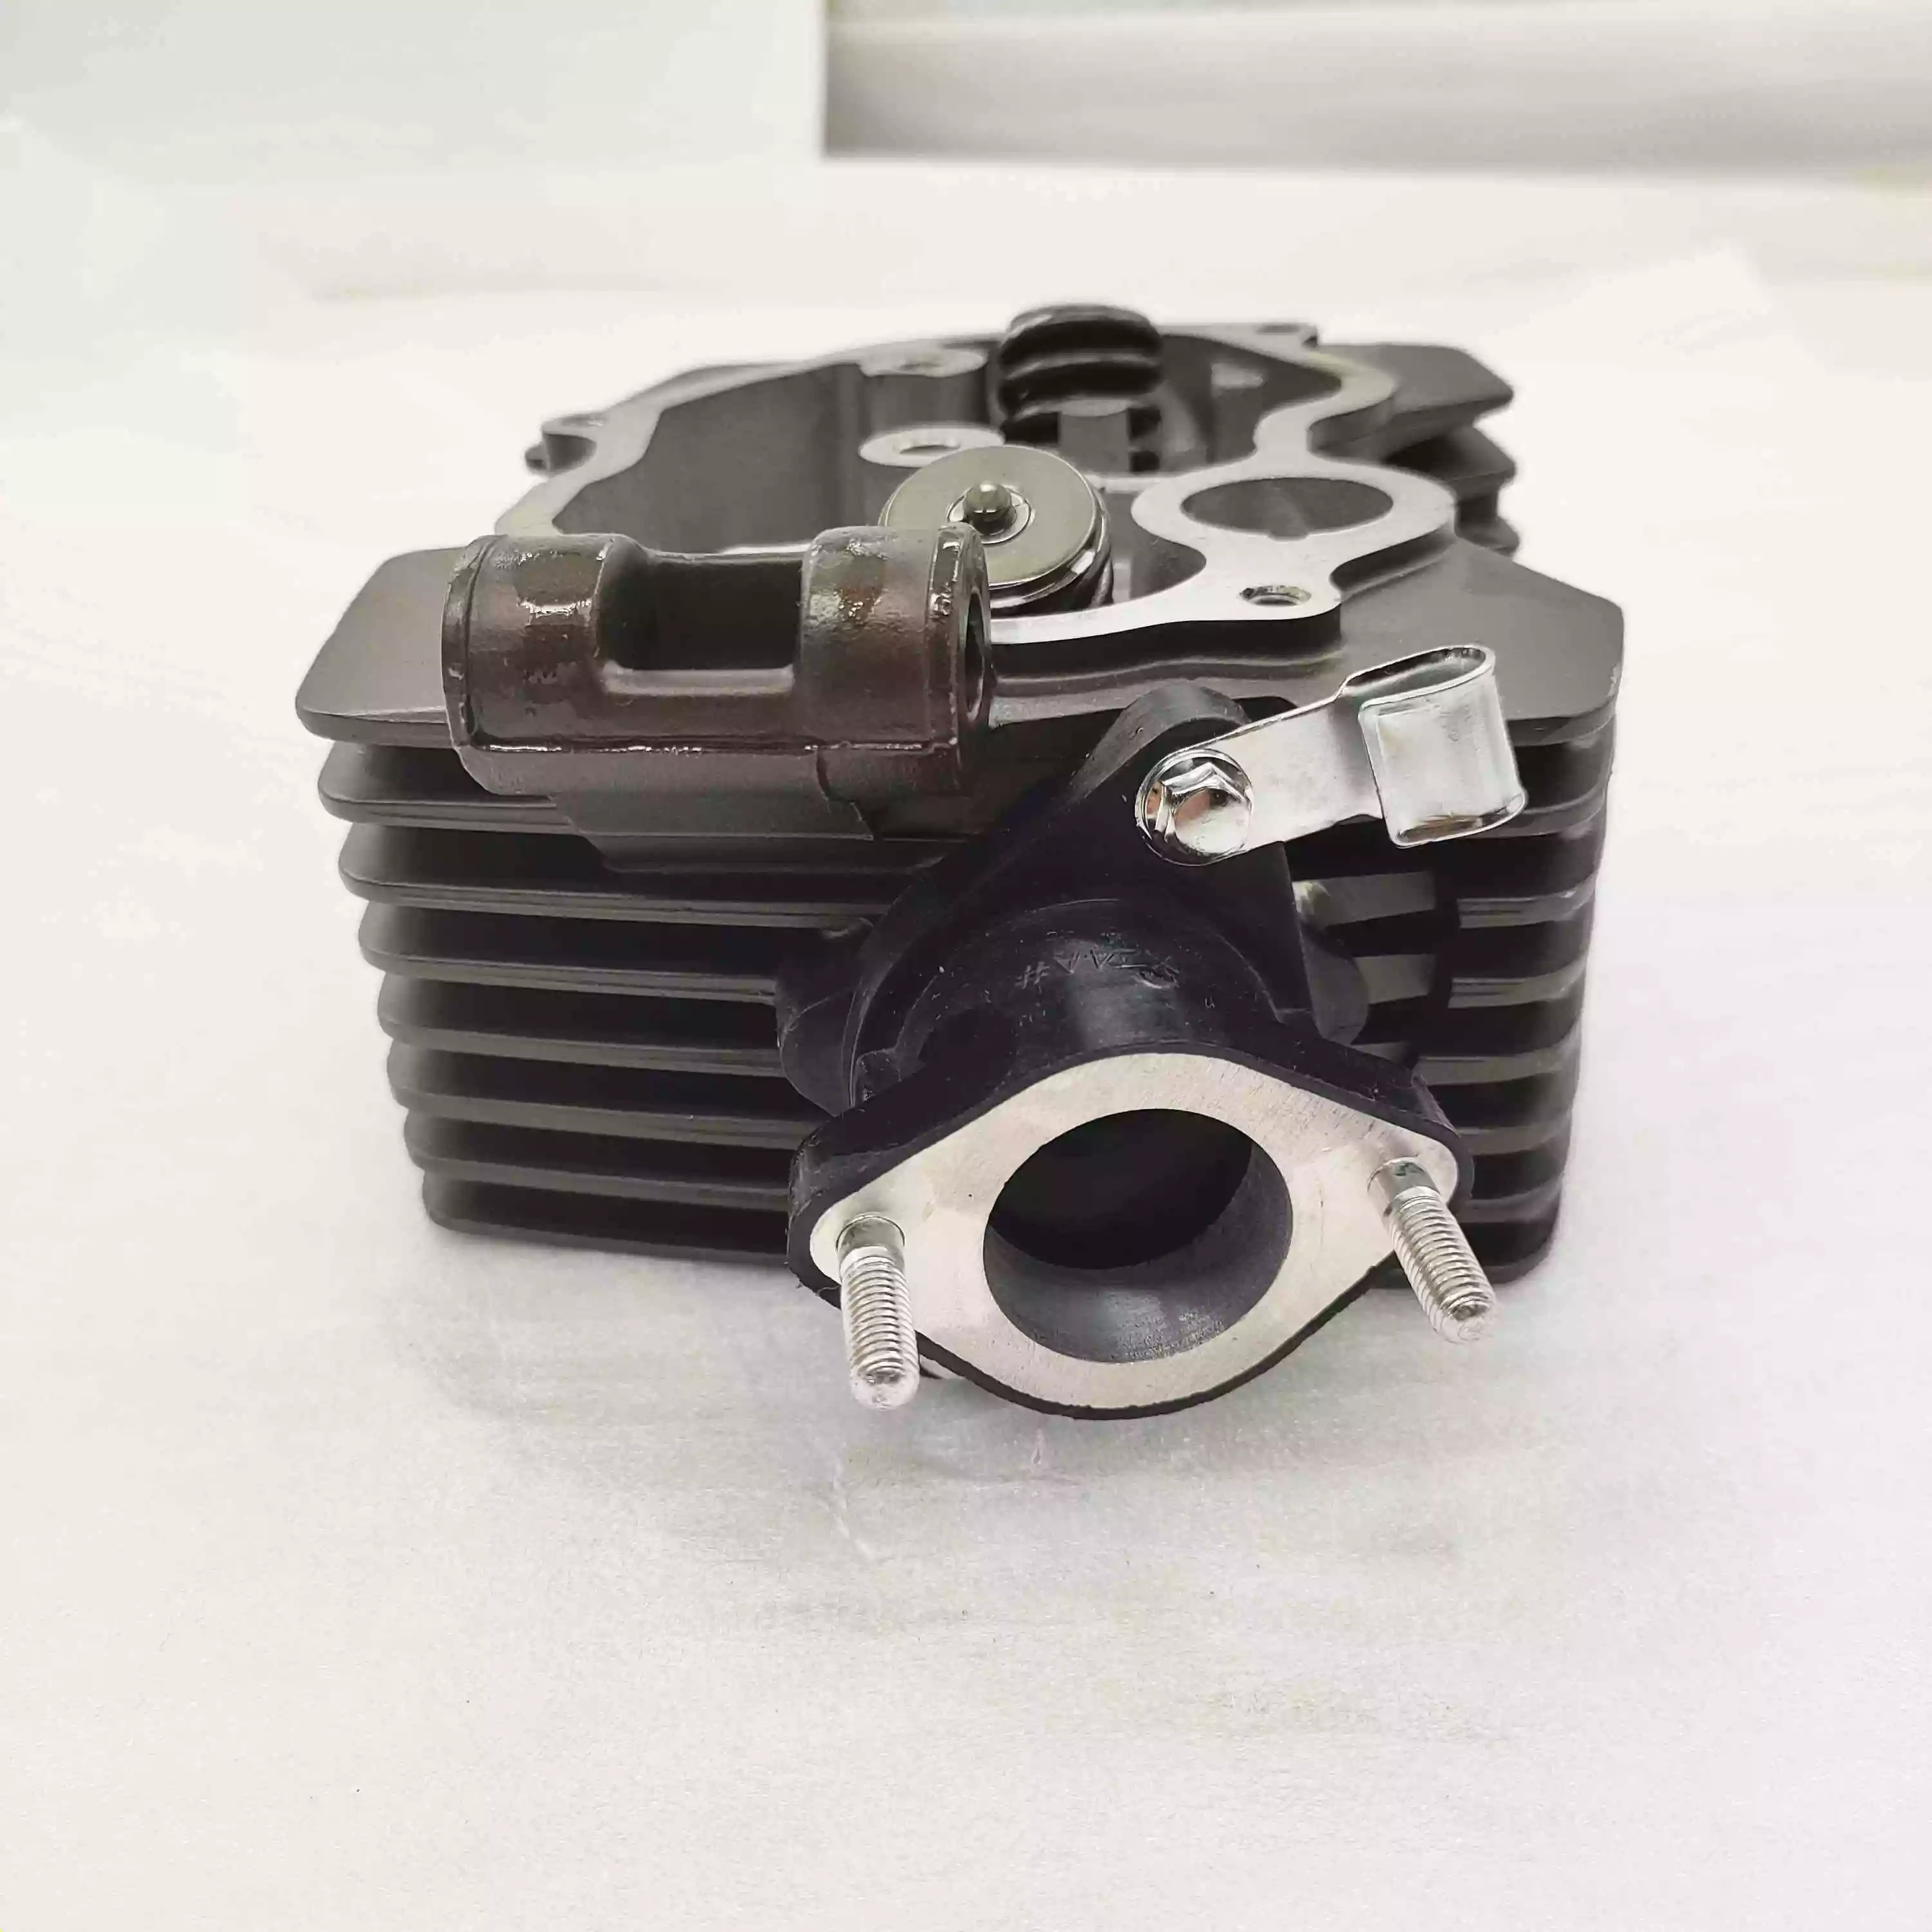 DAYANG hot sale motorcycle spare parts tricycle LIFAN150 air-cooled engine cylinder head custom origin type for adult